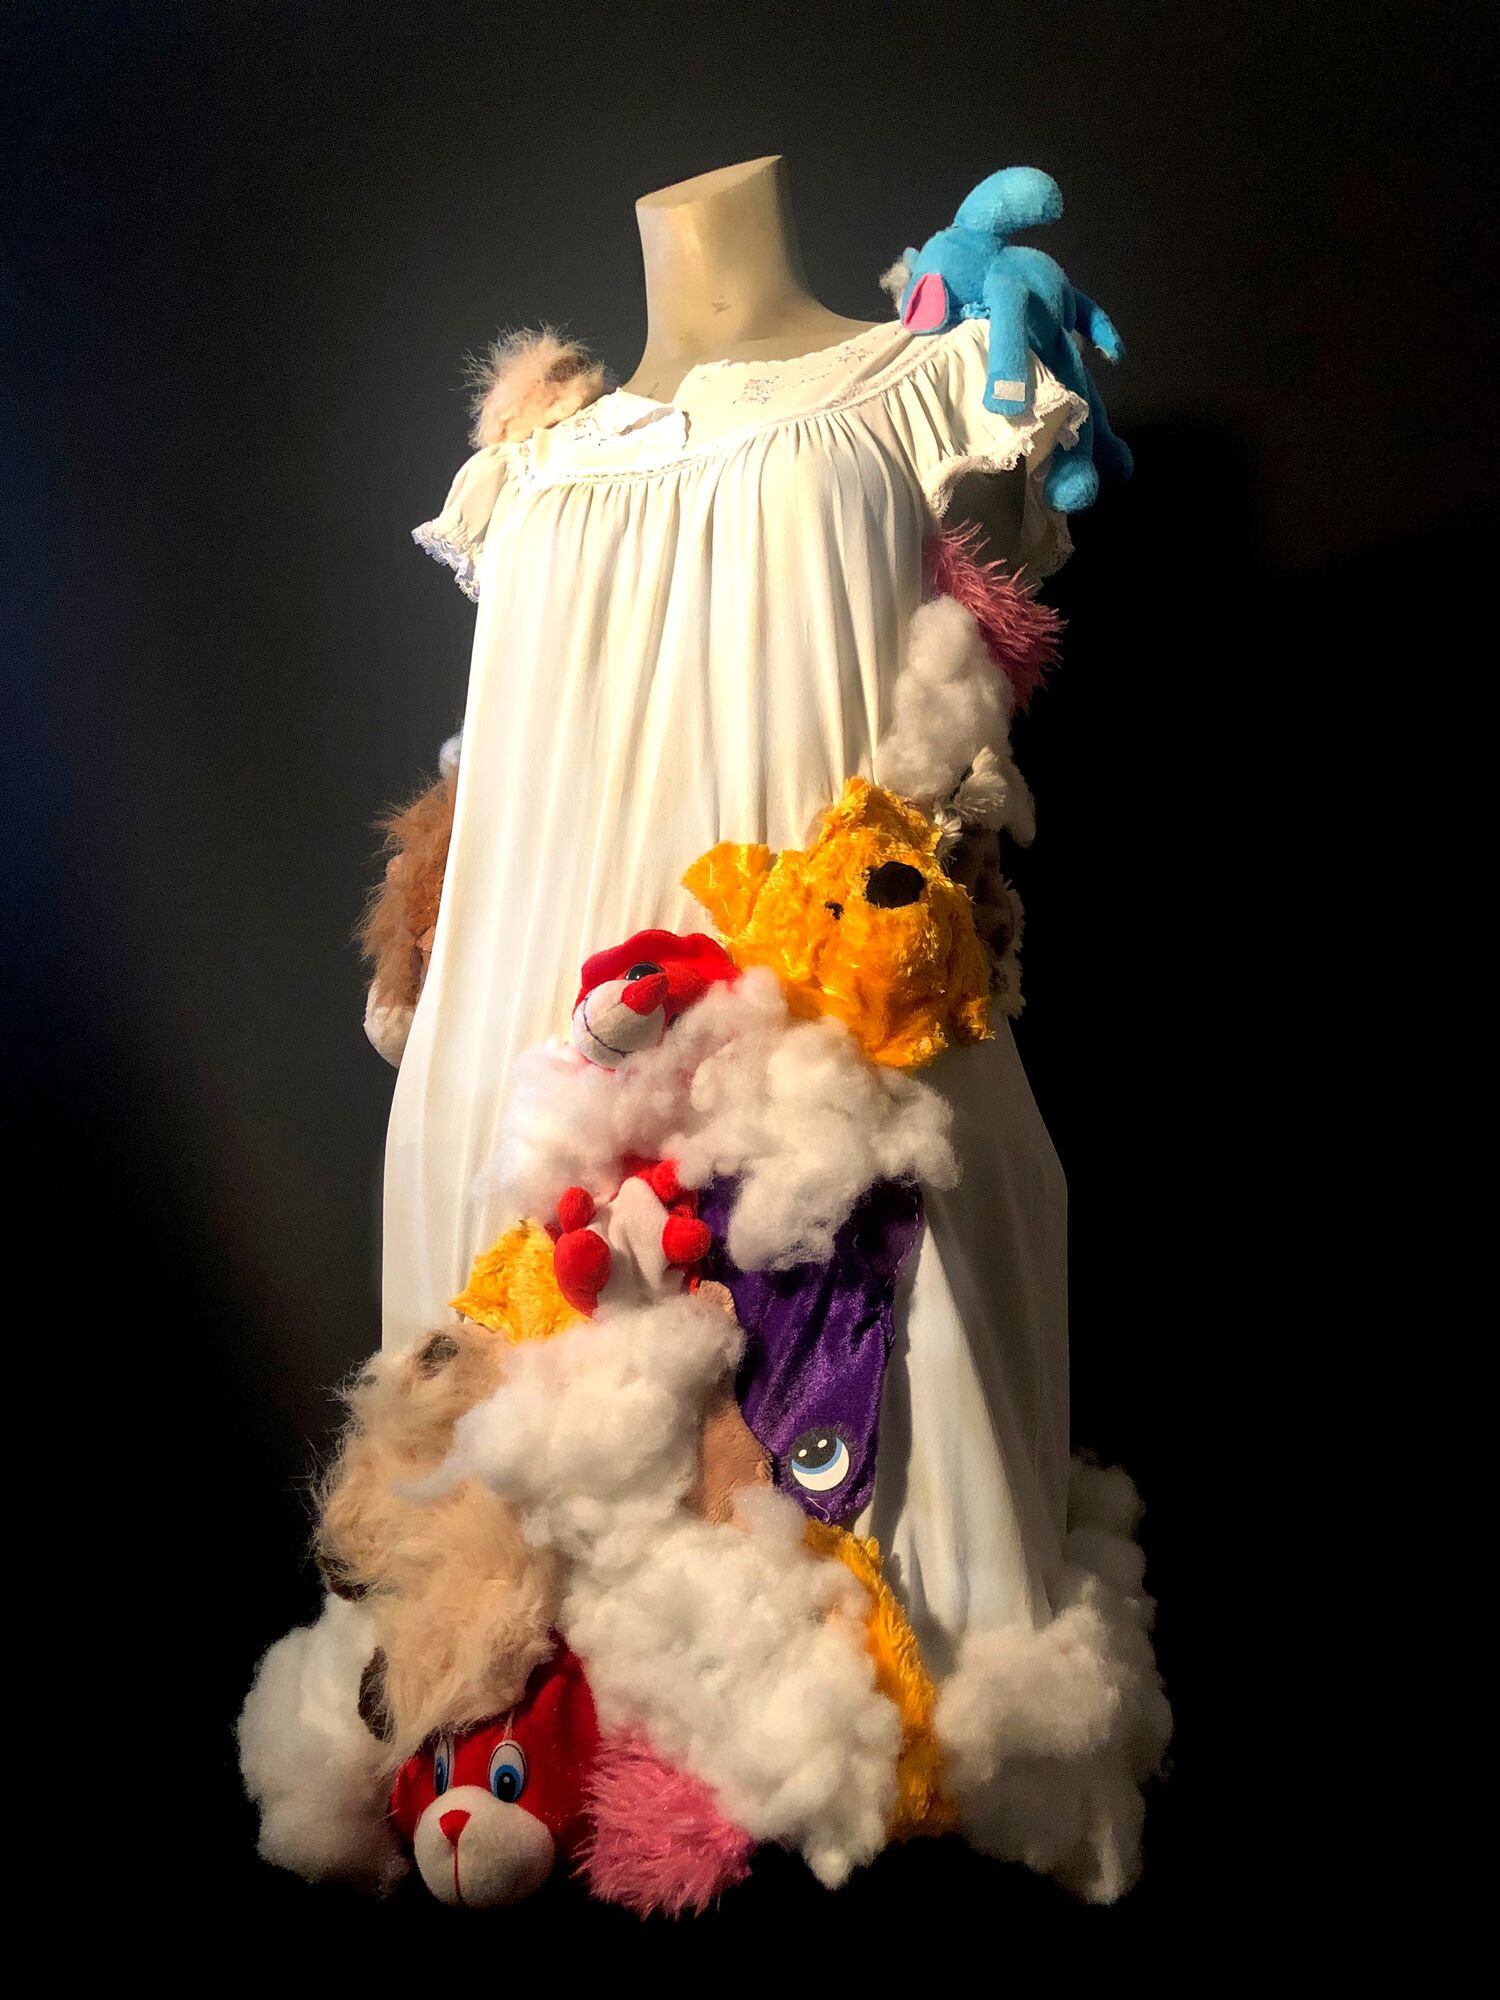 Student art exhibition showing a dress and stuffed animals